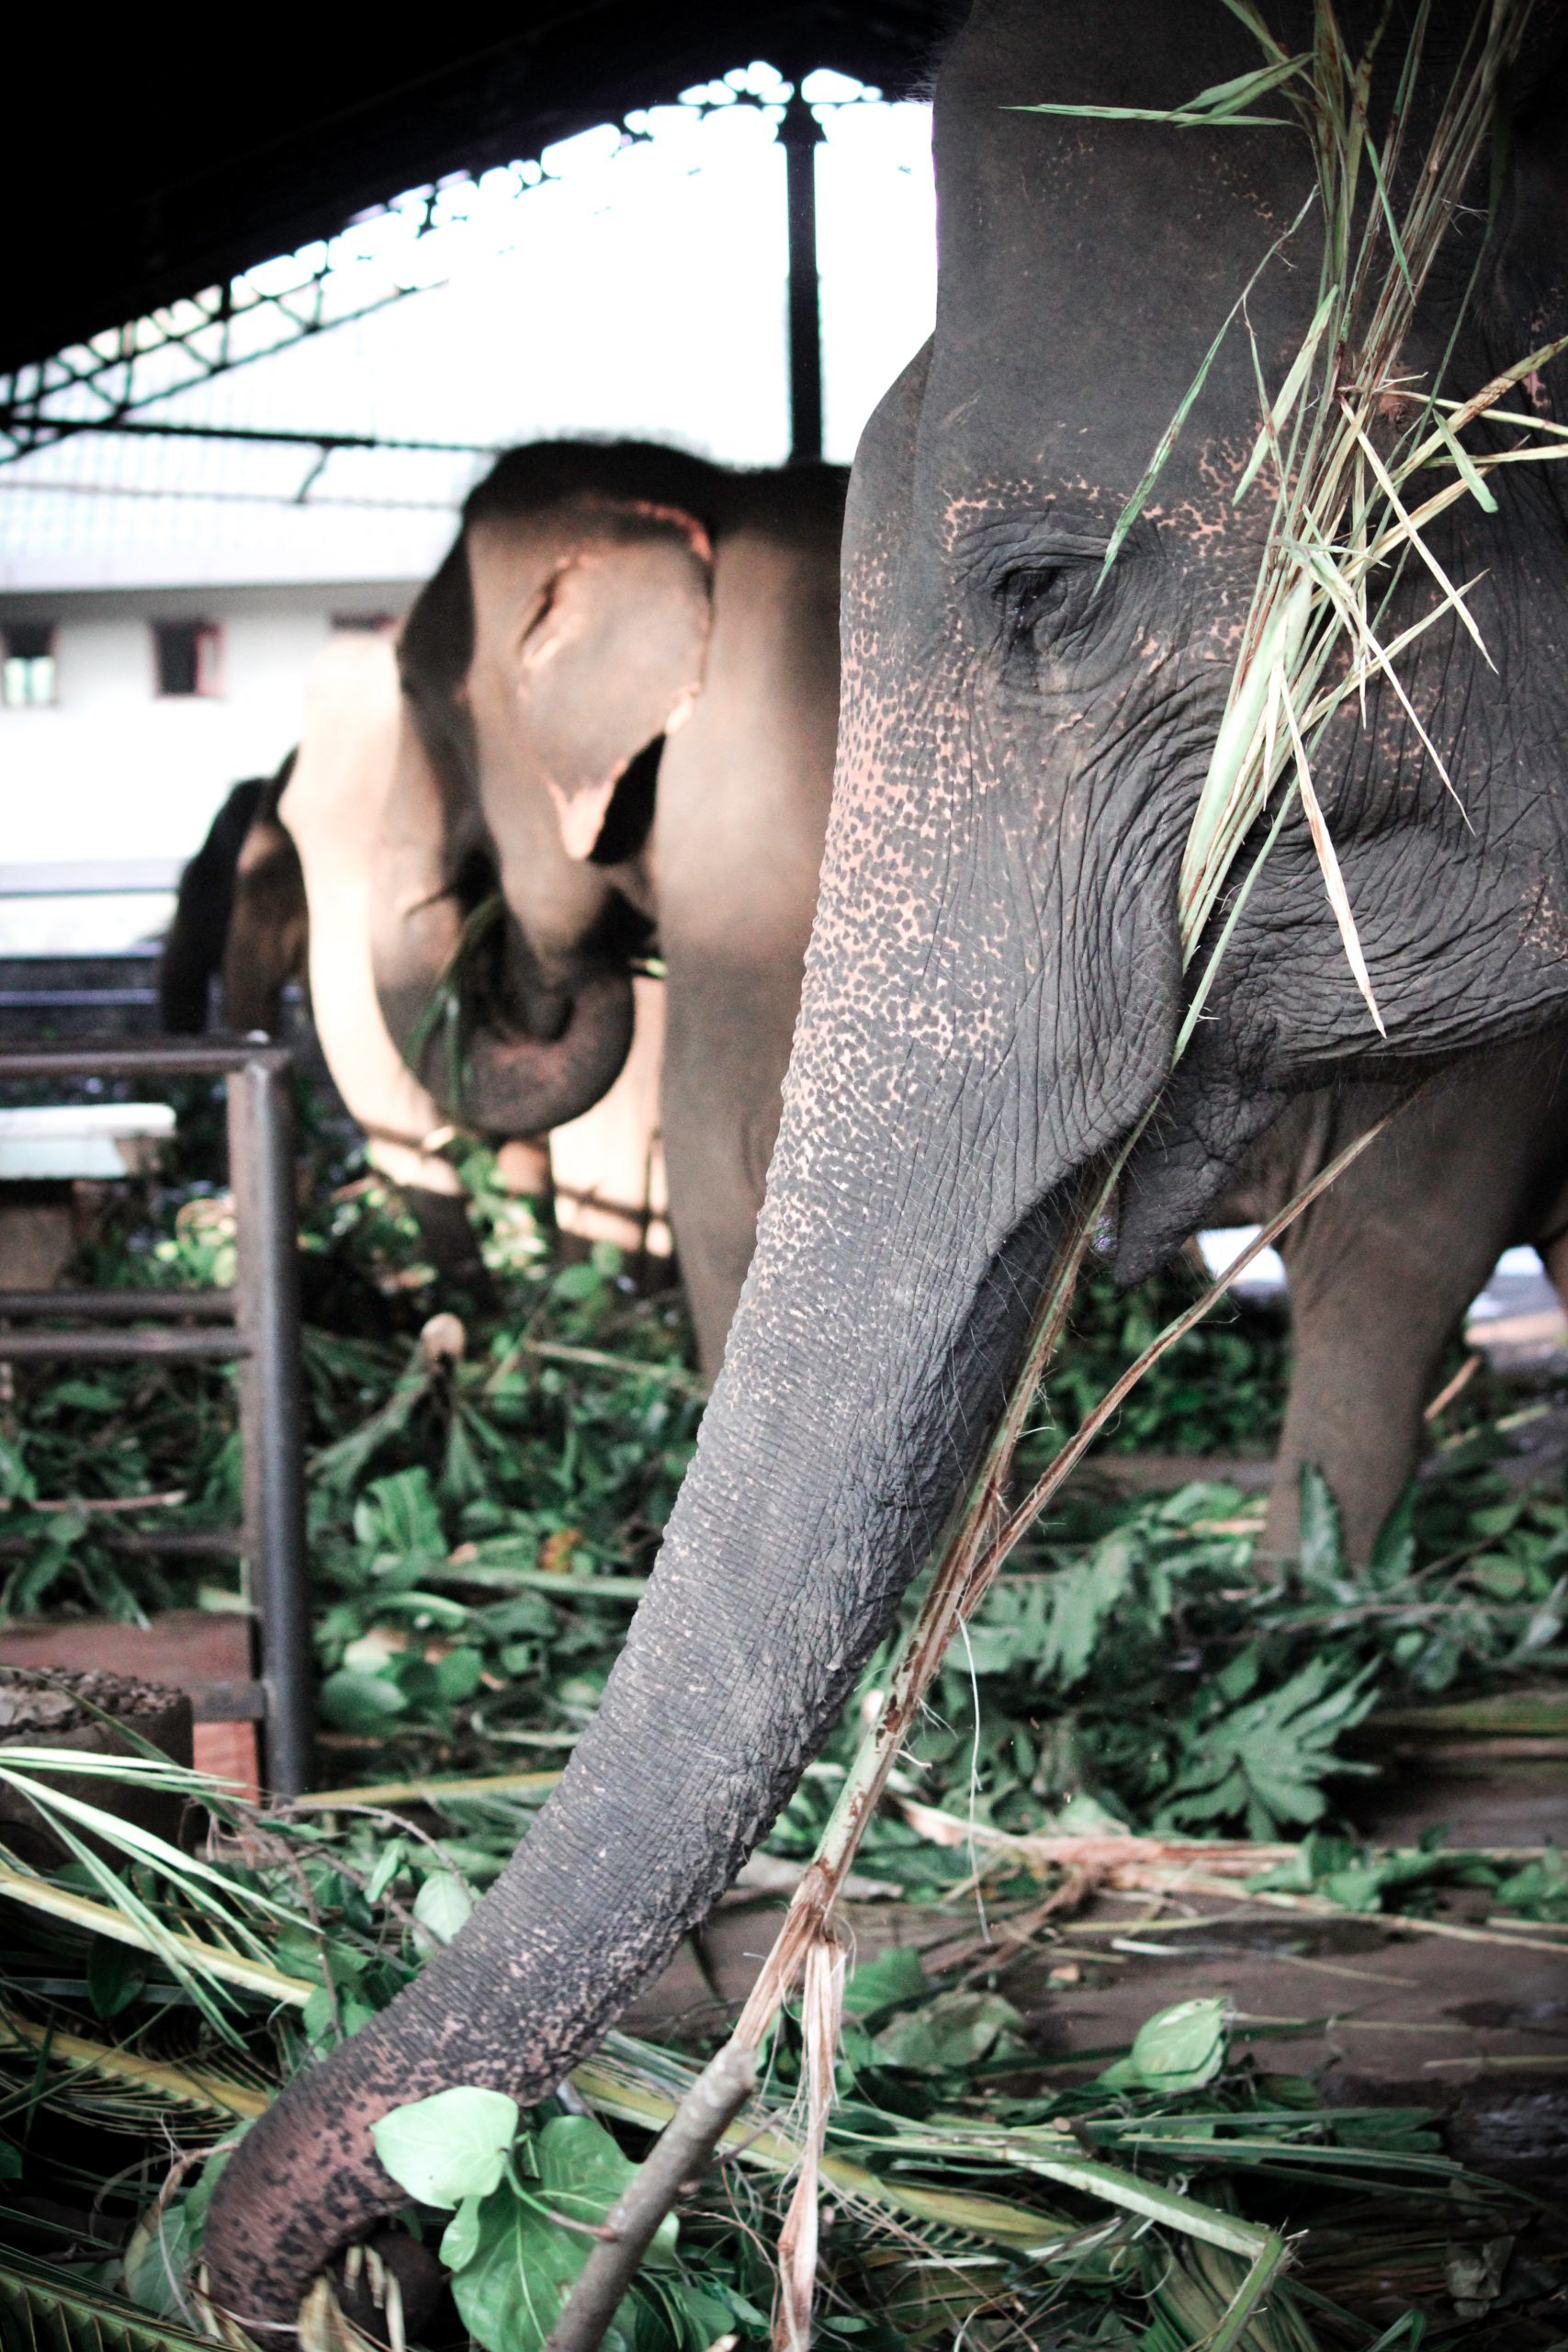 Elephants being fed at an orphanage